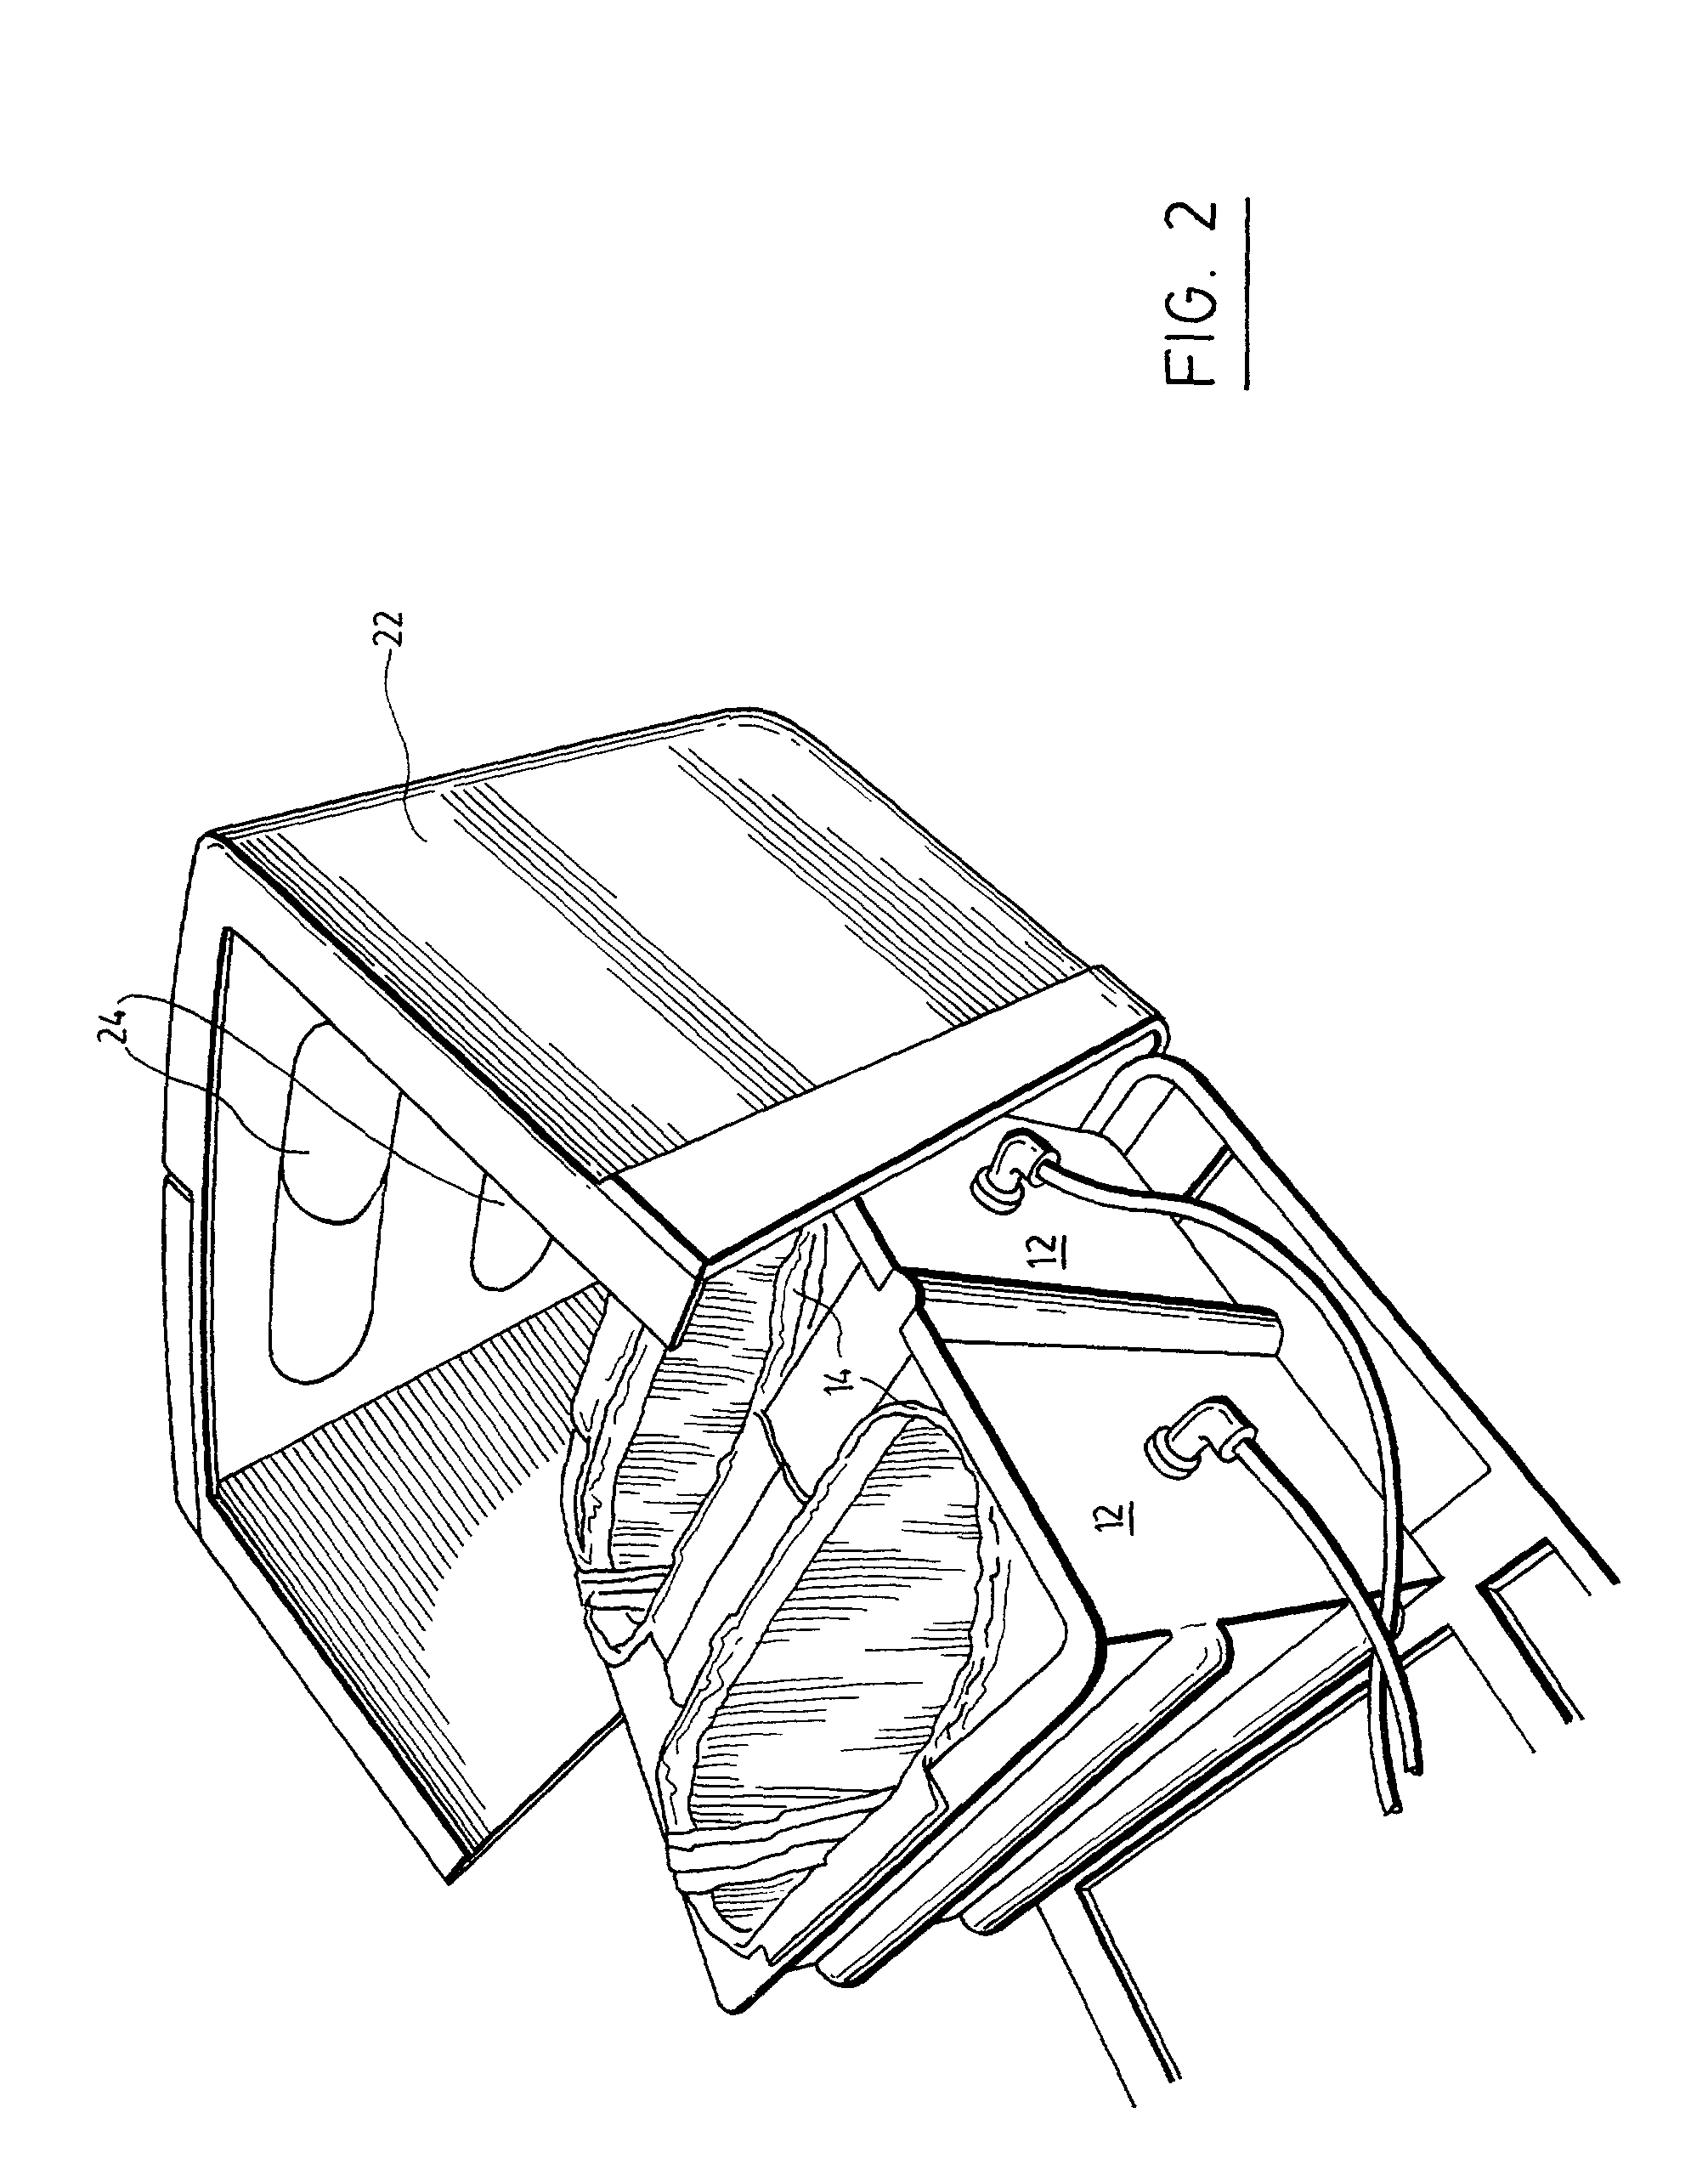 Method and apparatus for pressure molding multi-layer footwear